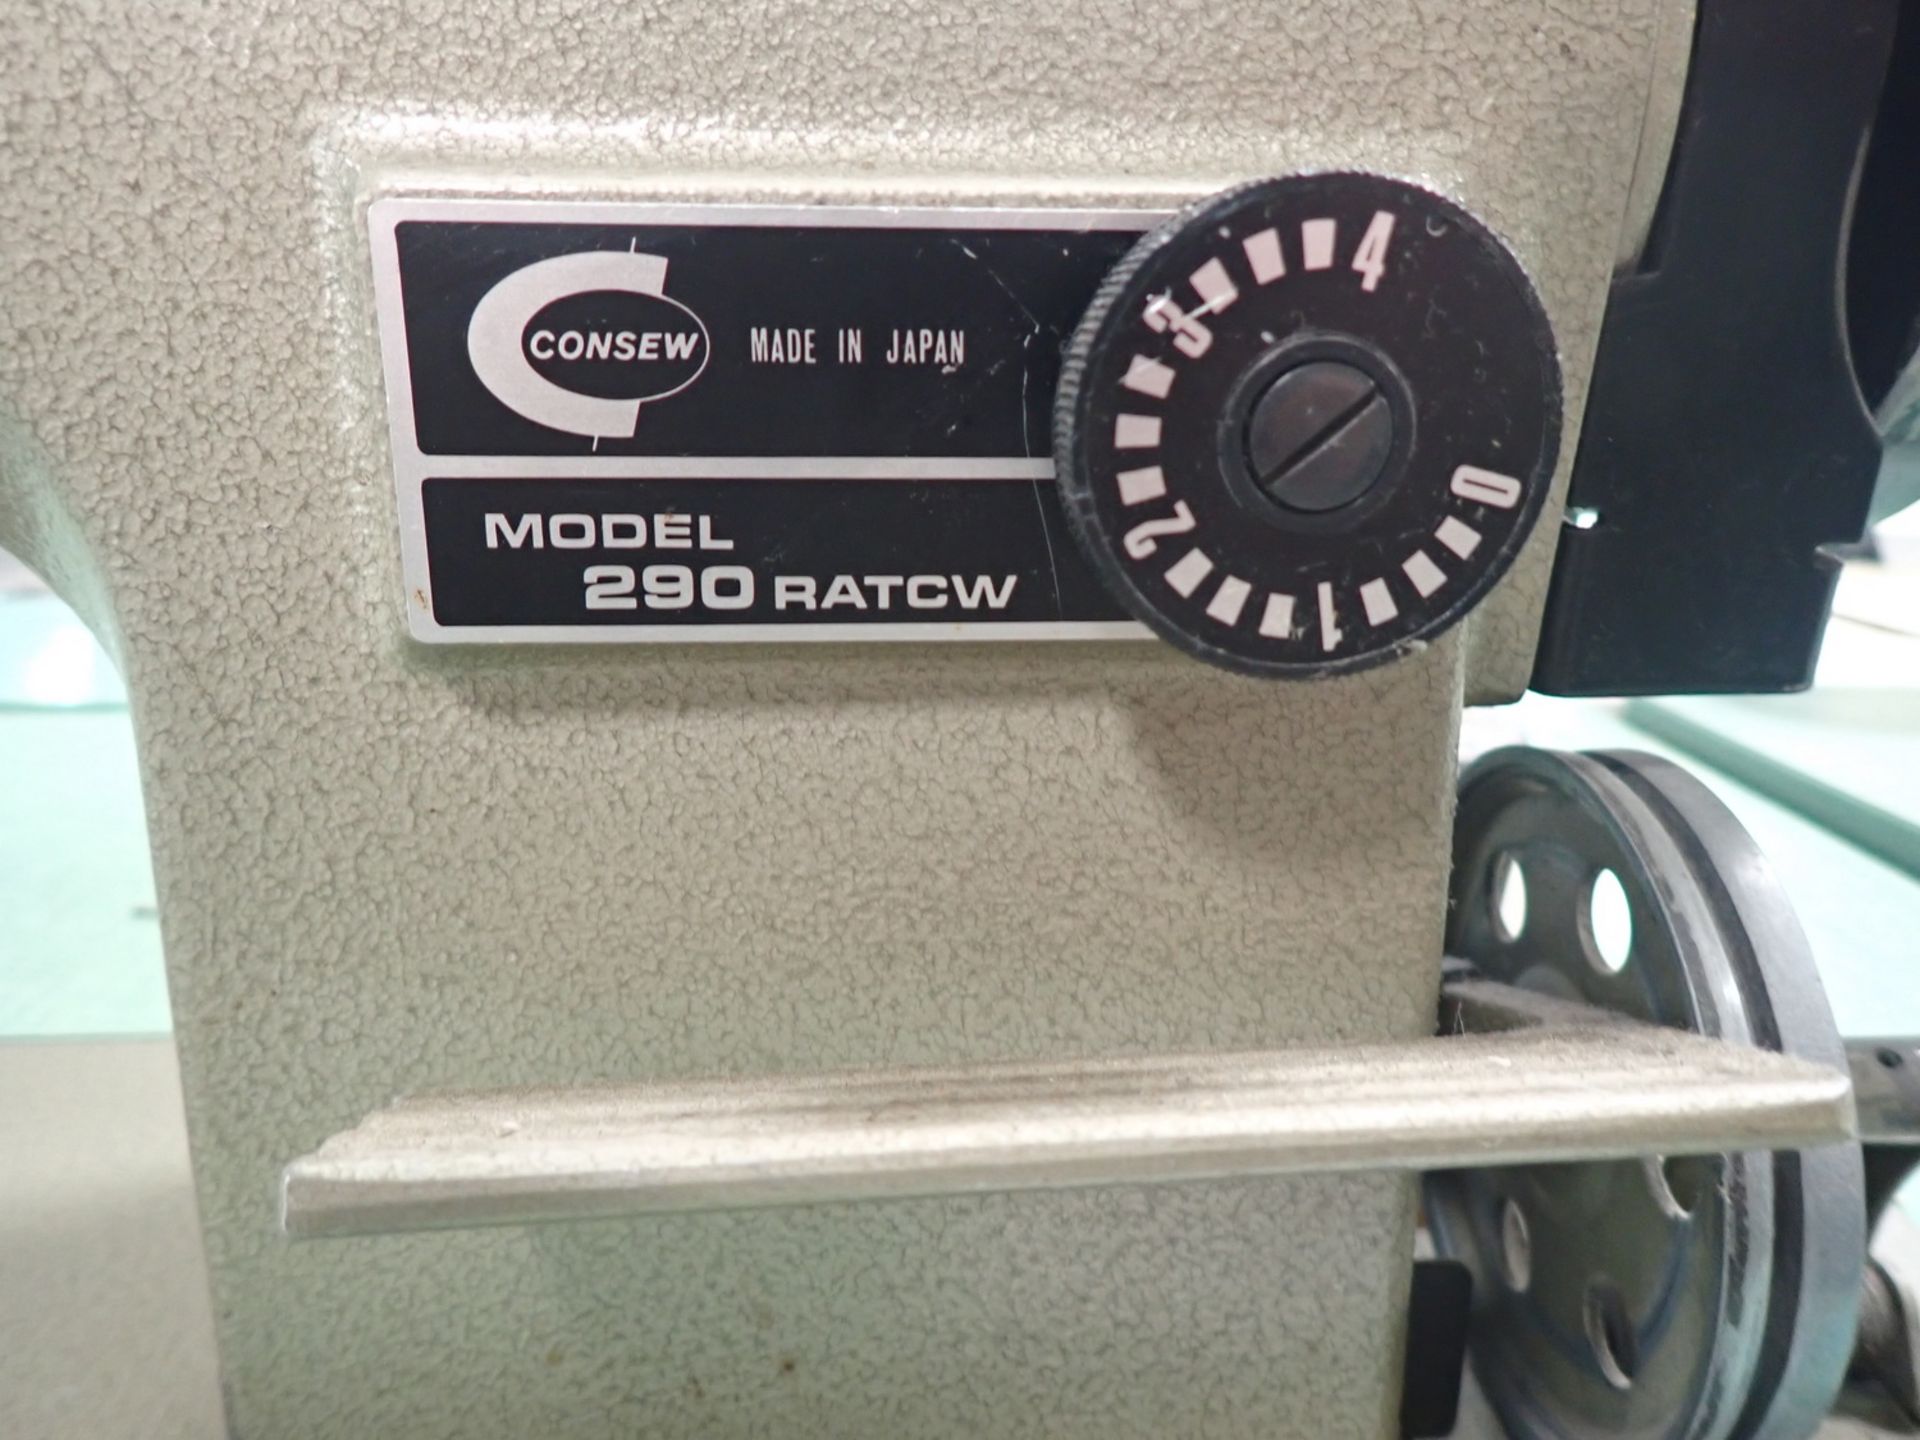 CONSEW - 290 RATCW SINGLE NEEDLE MACHINE W/ NEEDLE POSITIONER (HEAD SIEZED - AS IS) - Image 2 of 7